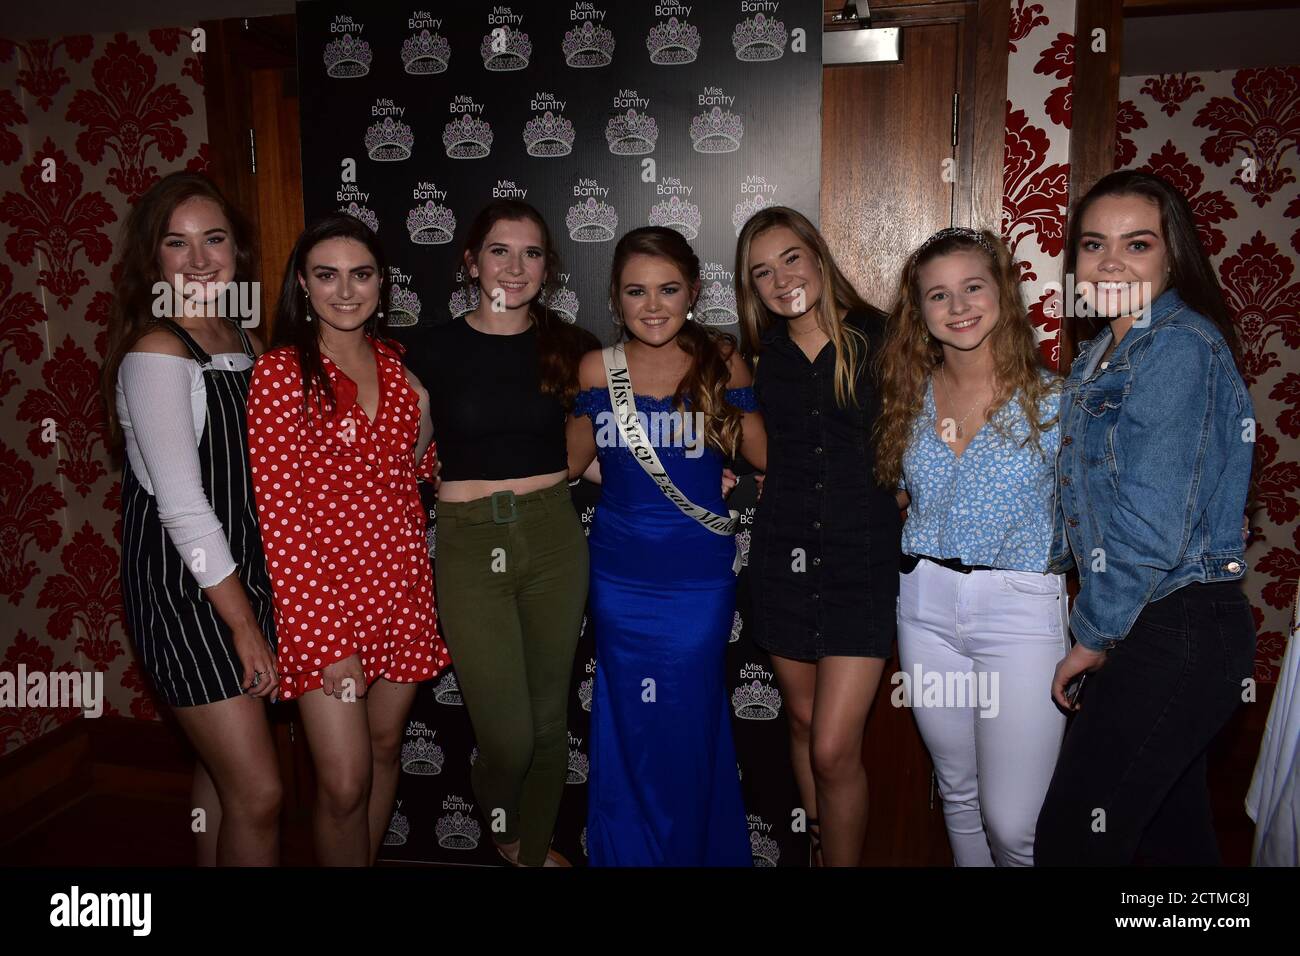 Miss and Mr Bantry 2019 beauty pageant organized by Martina Wiseman. night’s proceeds going to the local Cancer Connect charity. Stock Photo